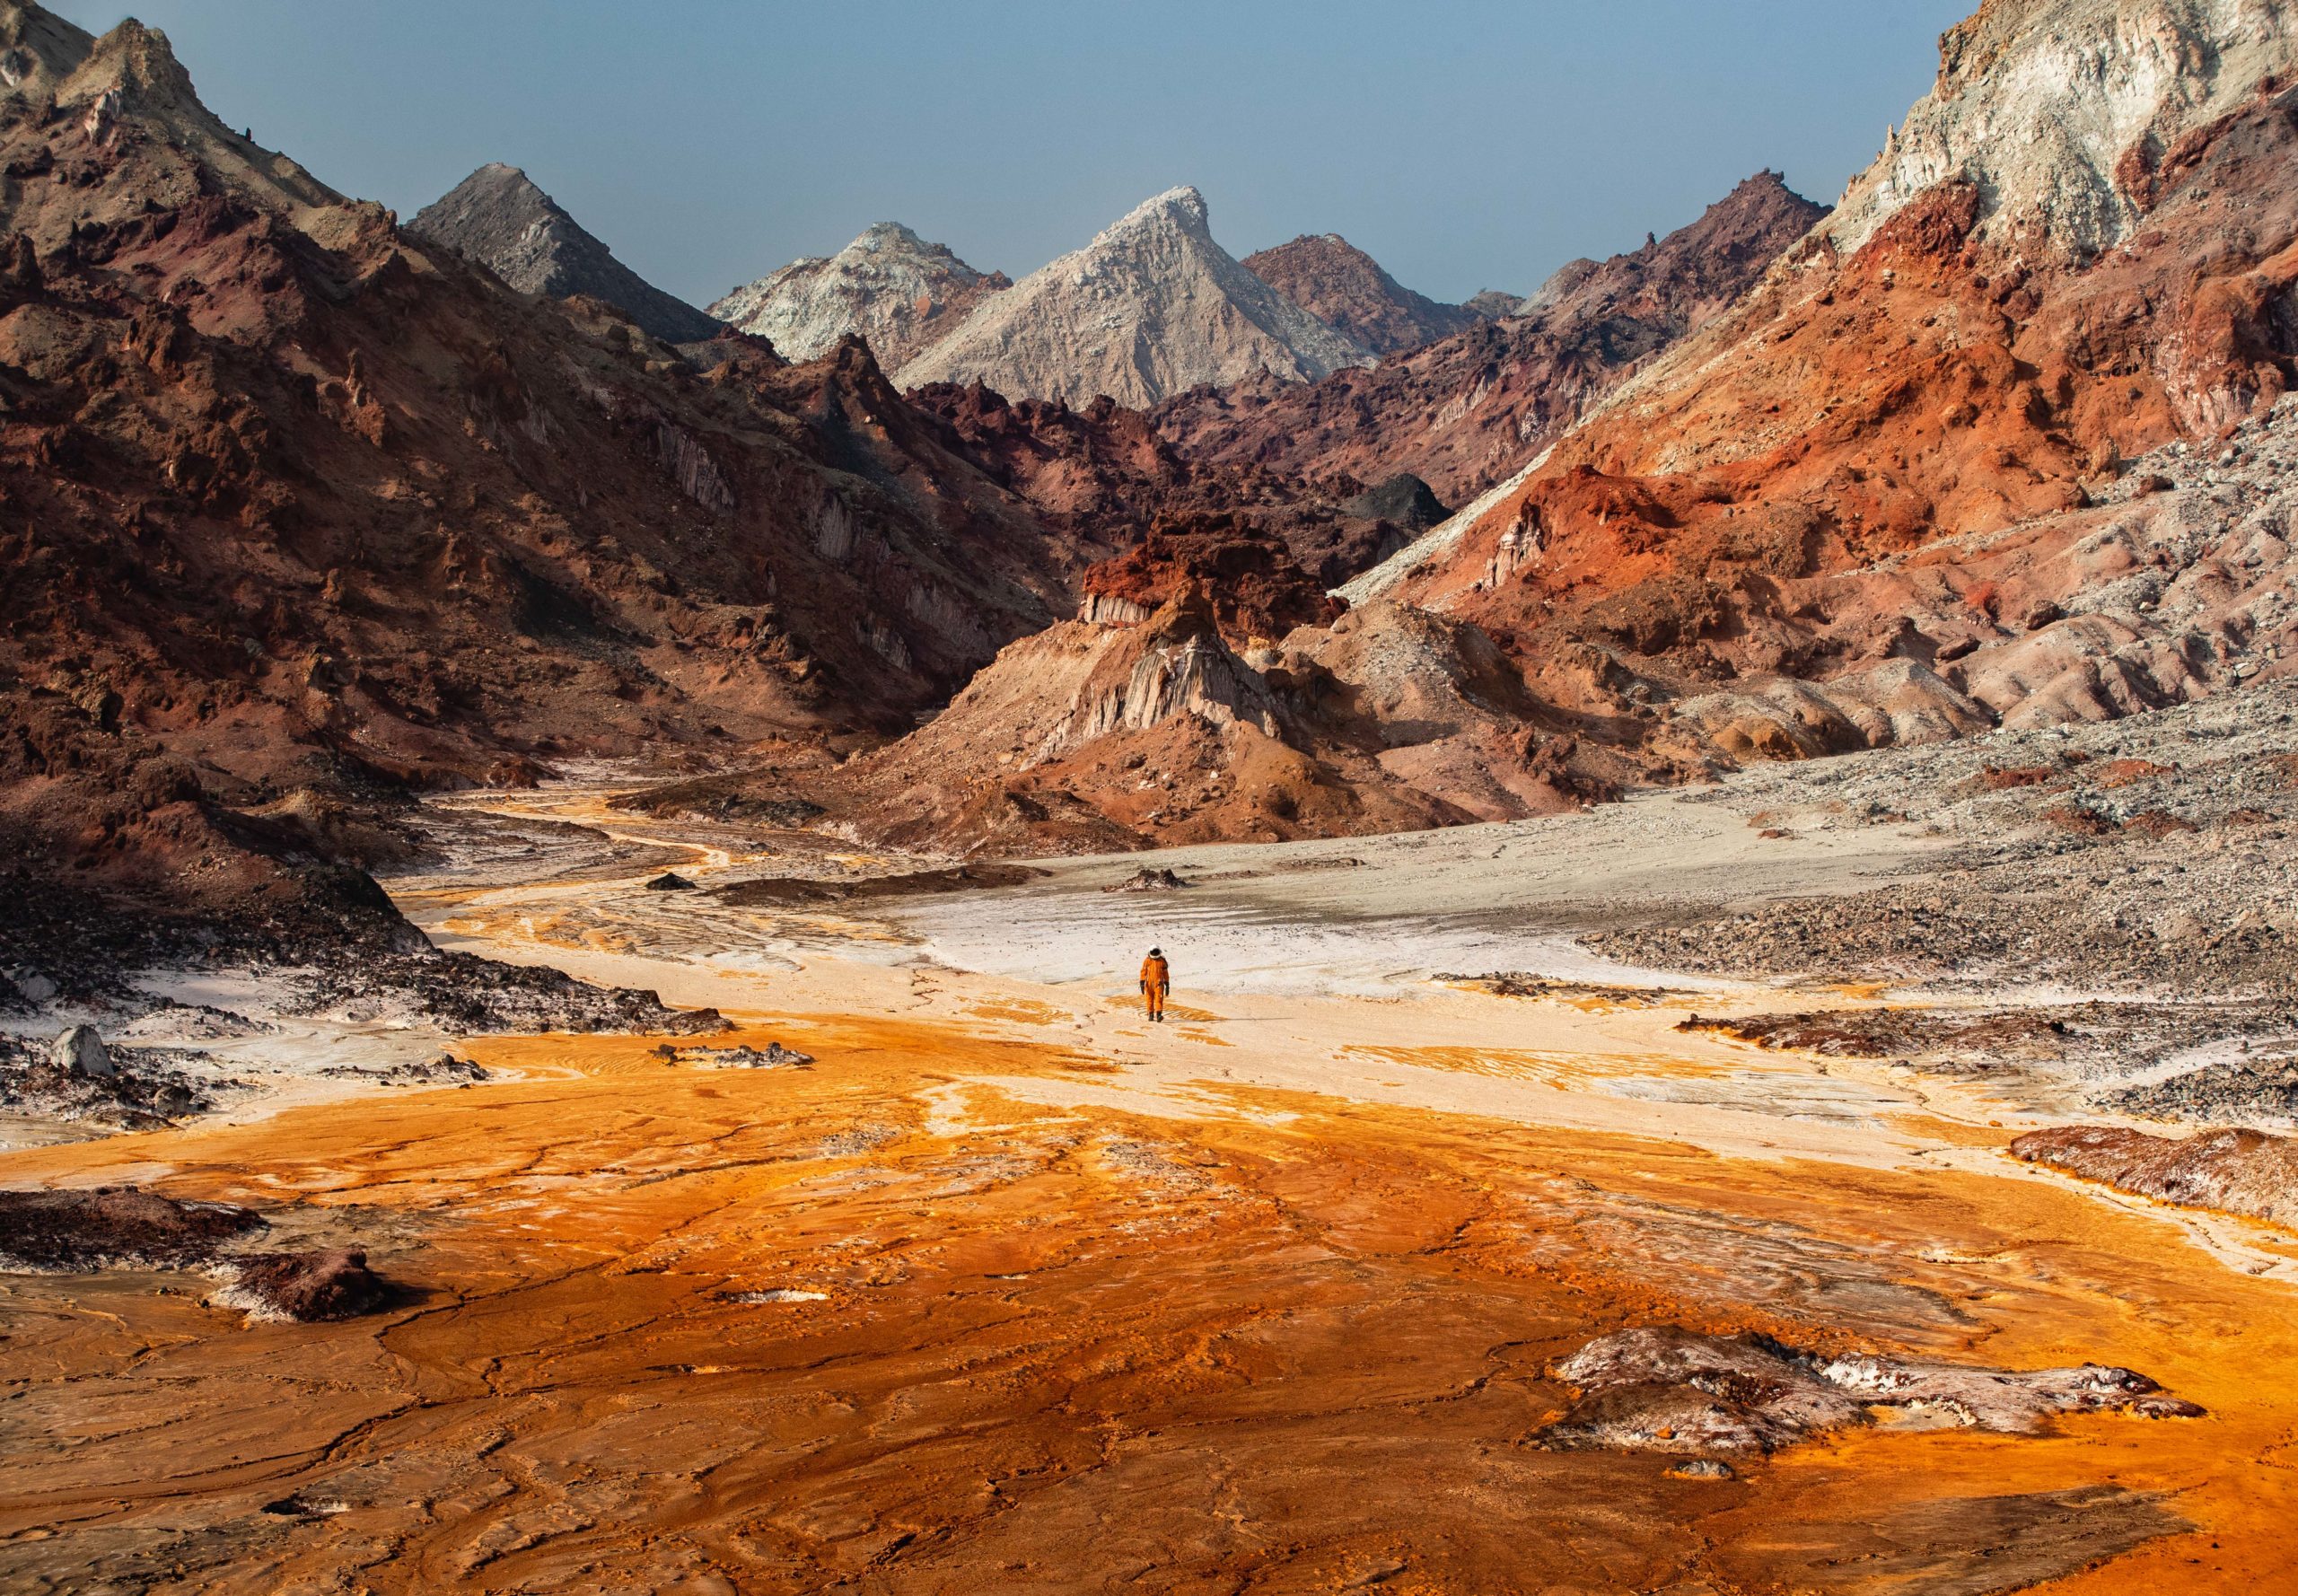 Landscape photography of an astronaut exploring the otherworldly landscape of a salt river in southern Iran